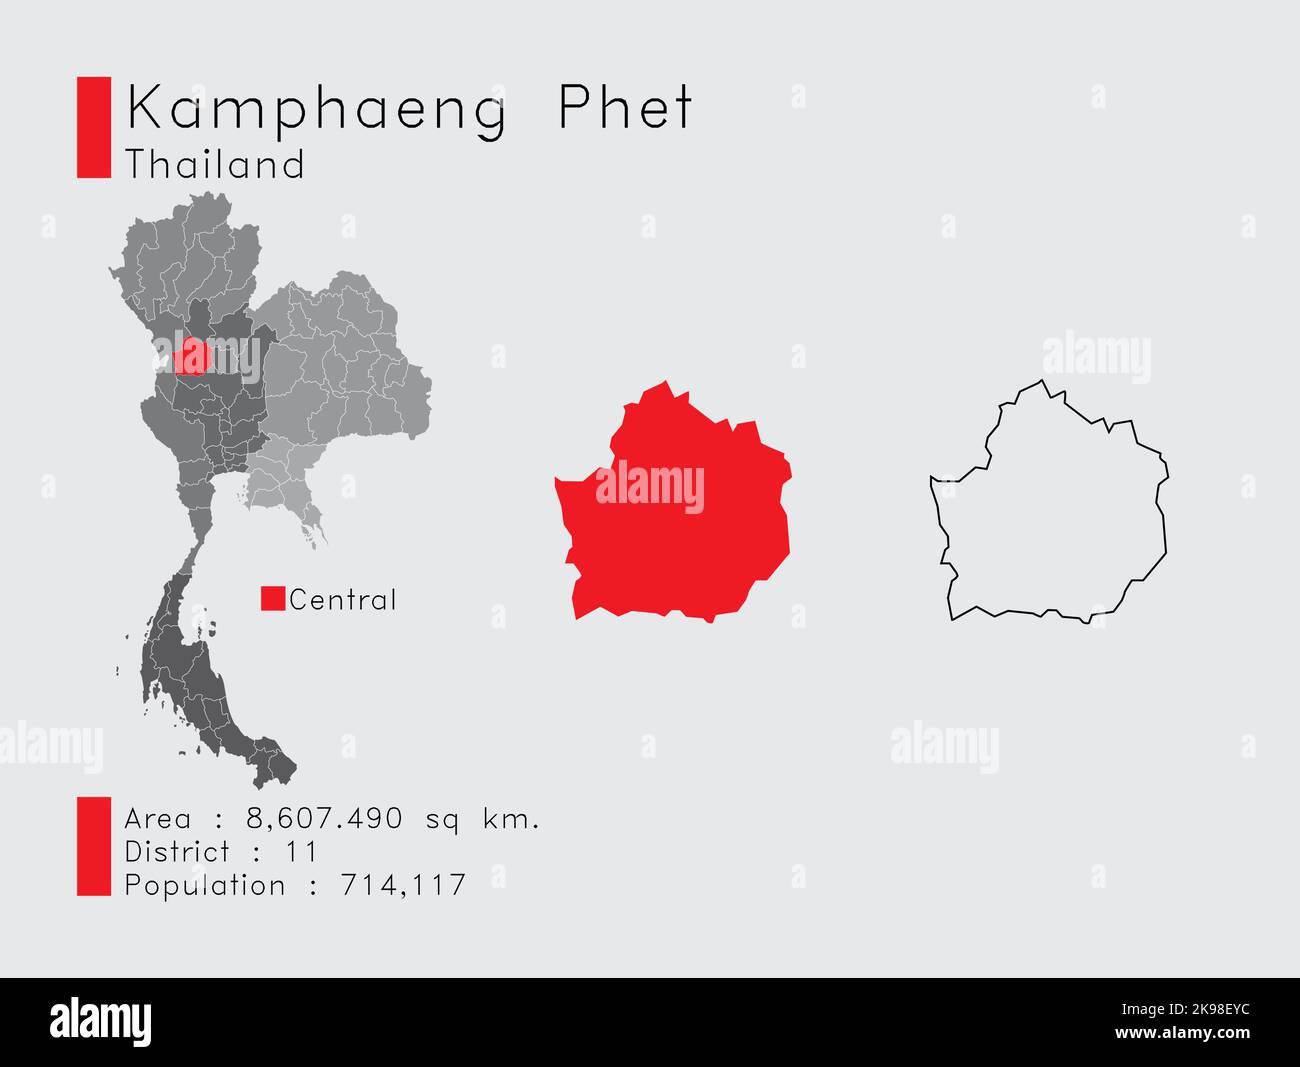 A Set of Infographic Elements for the Province Kamphaeng Phet Position in Thailand. and Area District Population and Outline. Vector with Gray Backgro Stock Vector